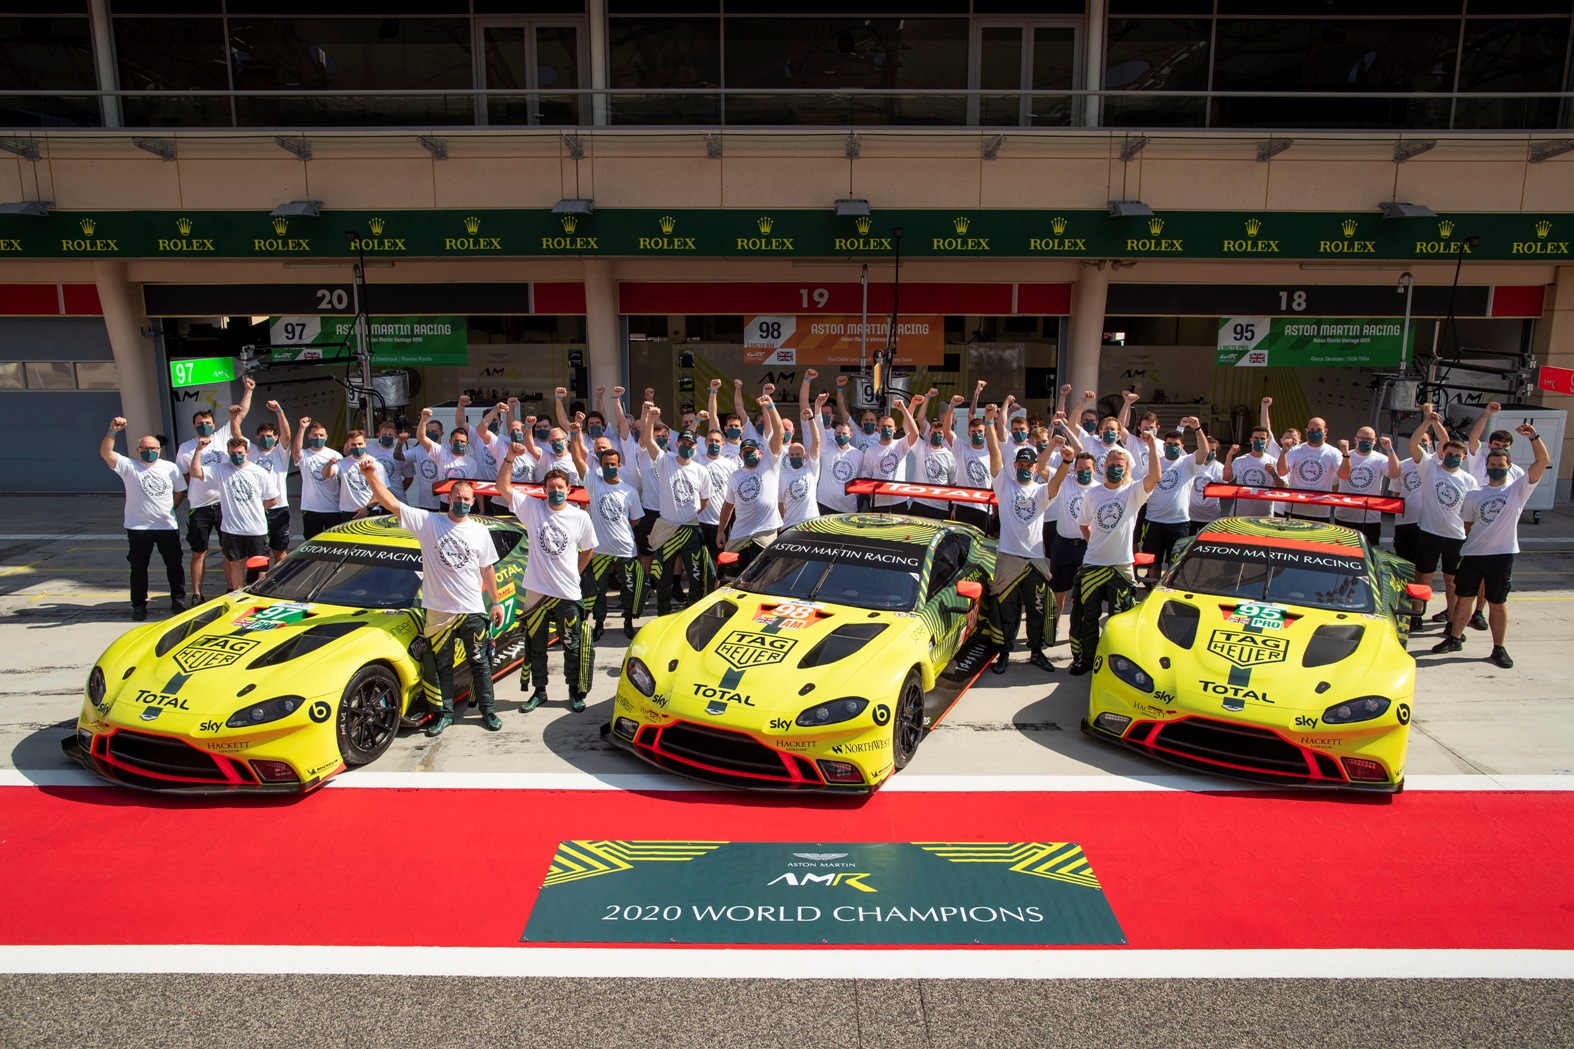 Aston Martin Crowns Its Most Successful GT Campaign With Another World Title